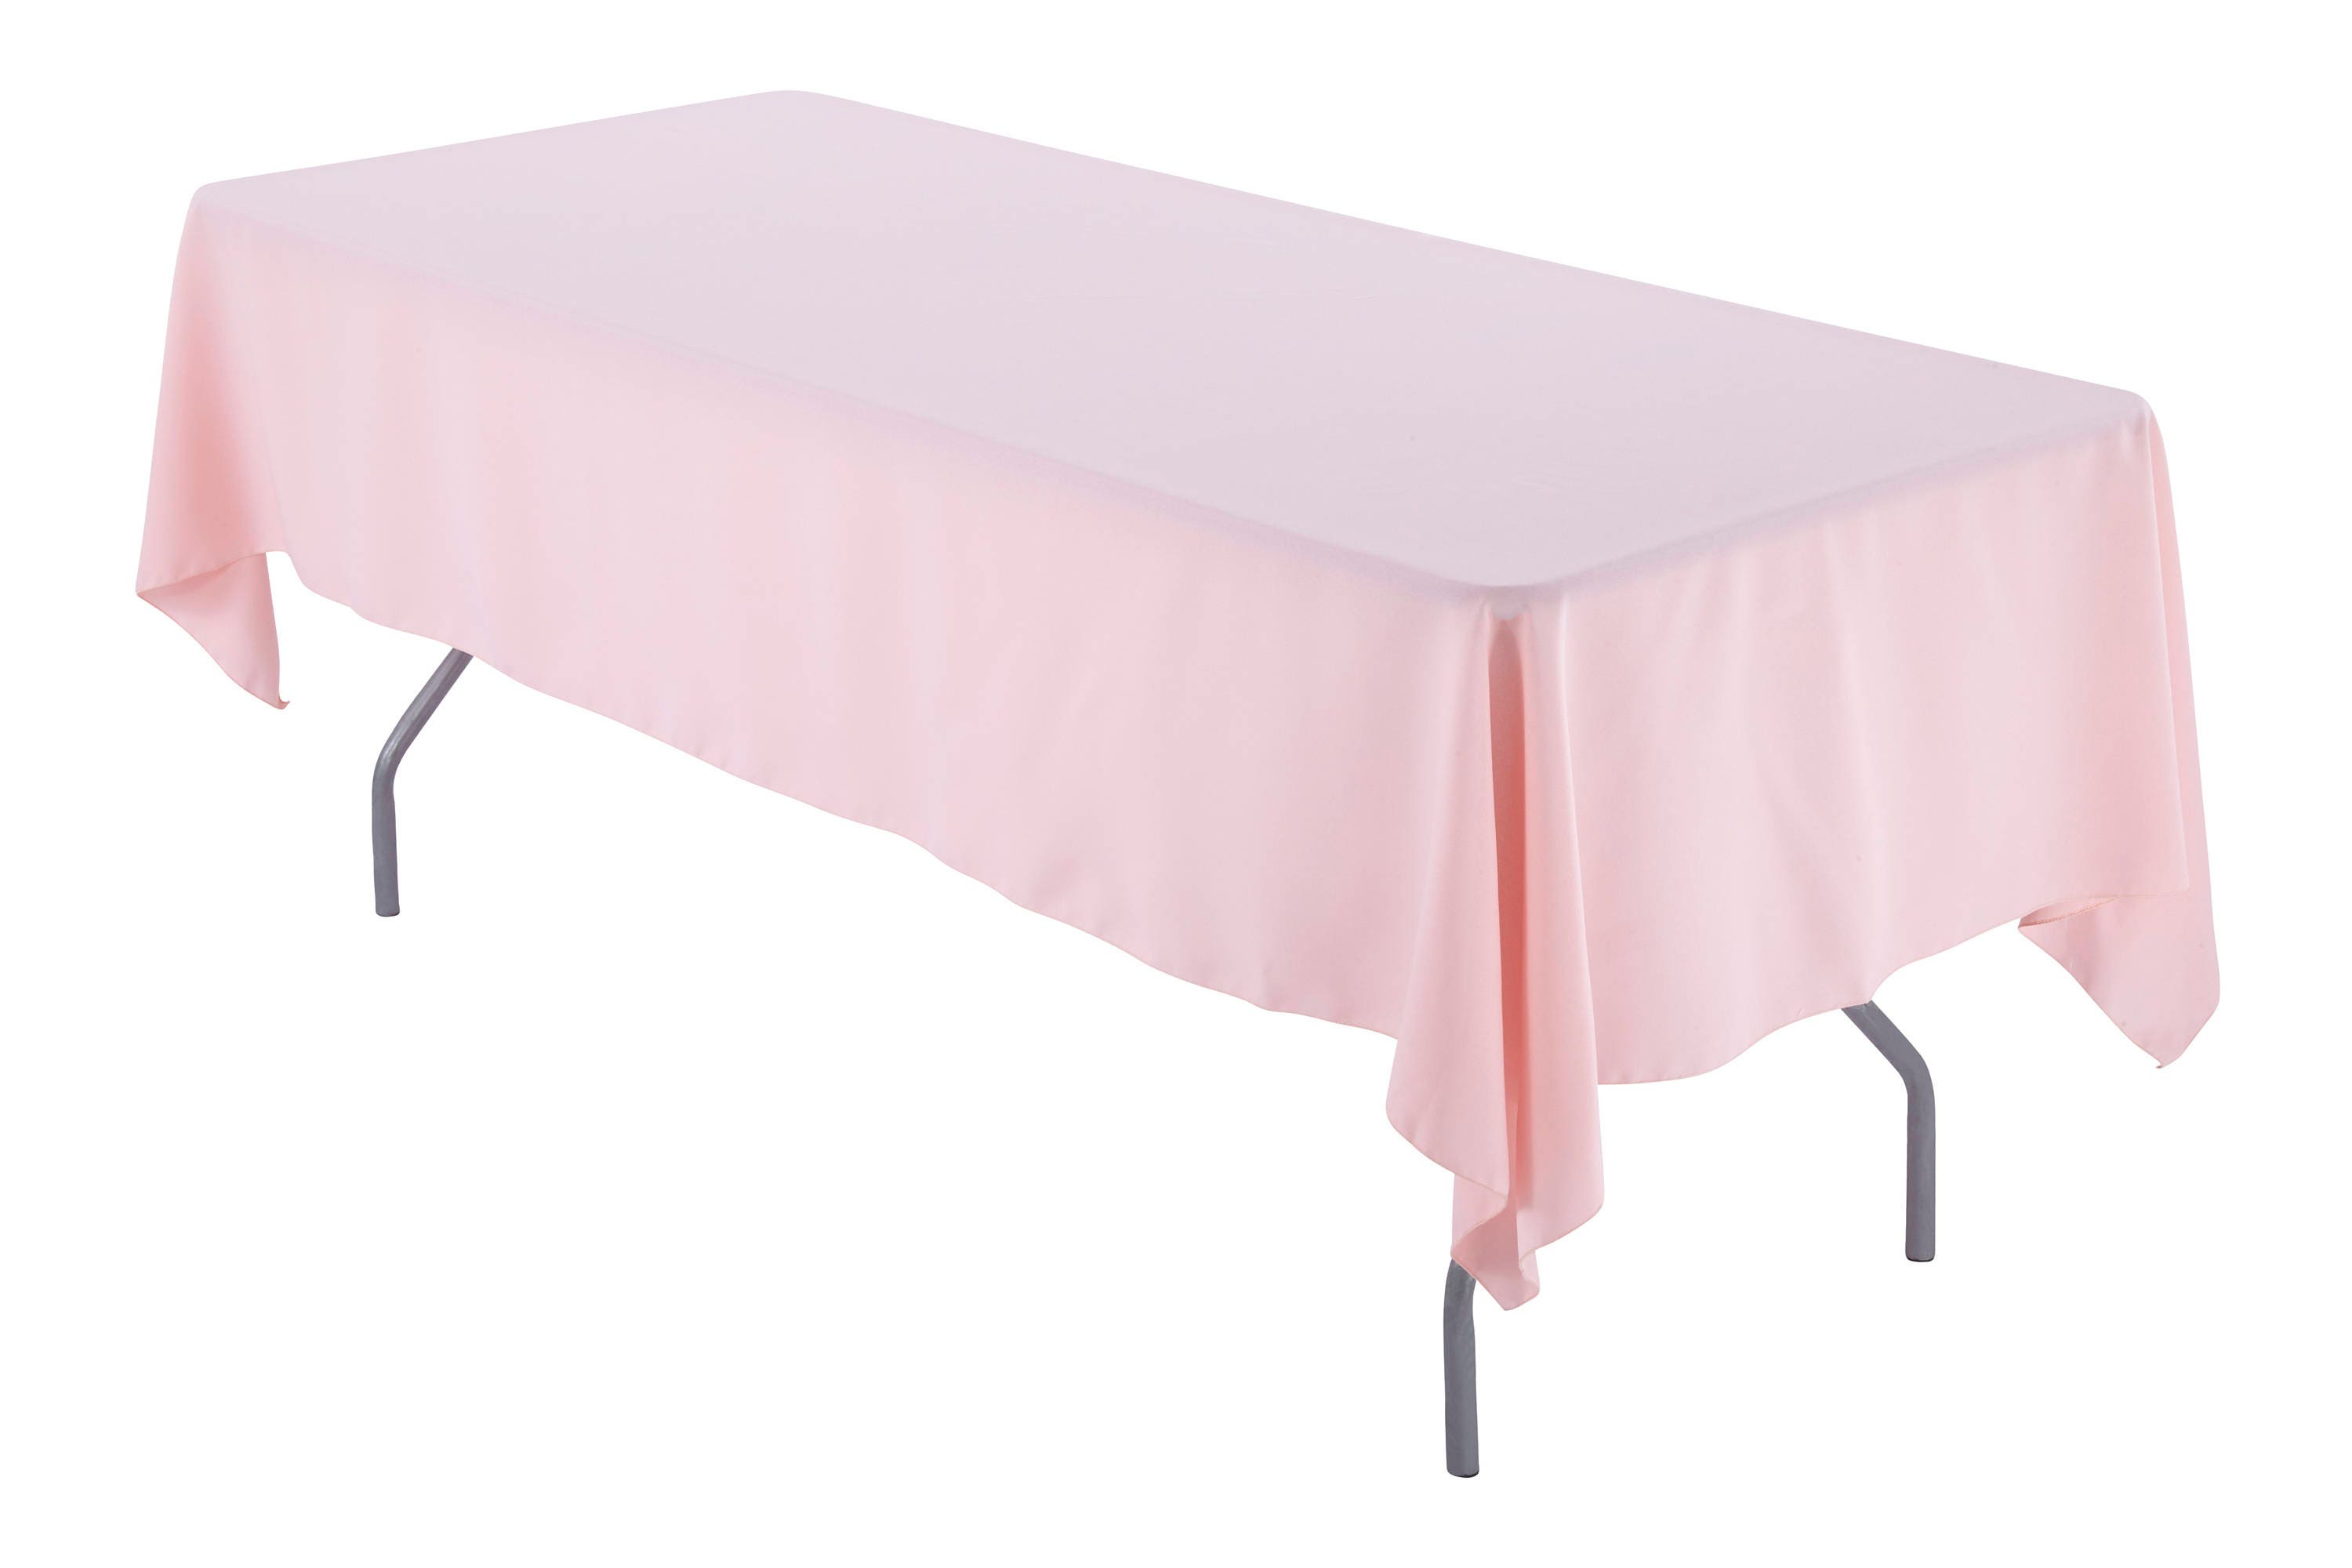 BLUSH 60x102" RECTANGLE POLYESTER TABLECLOTH Wedding Kitchen Catering Linens 